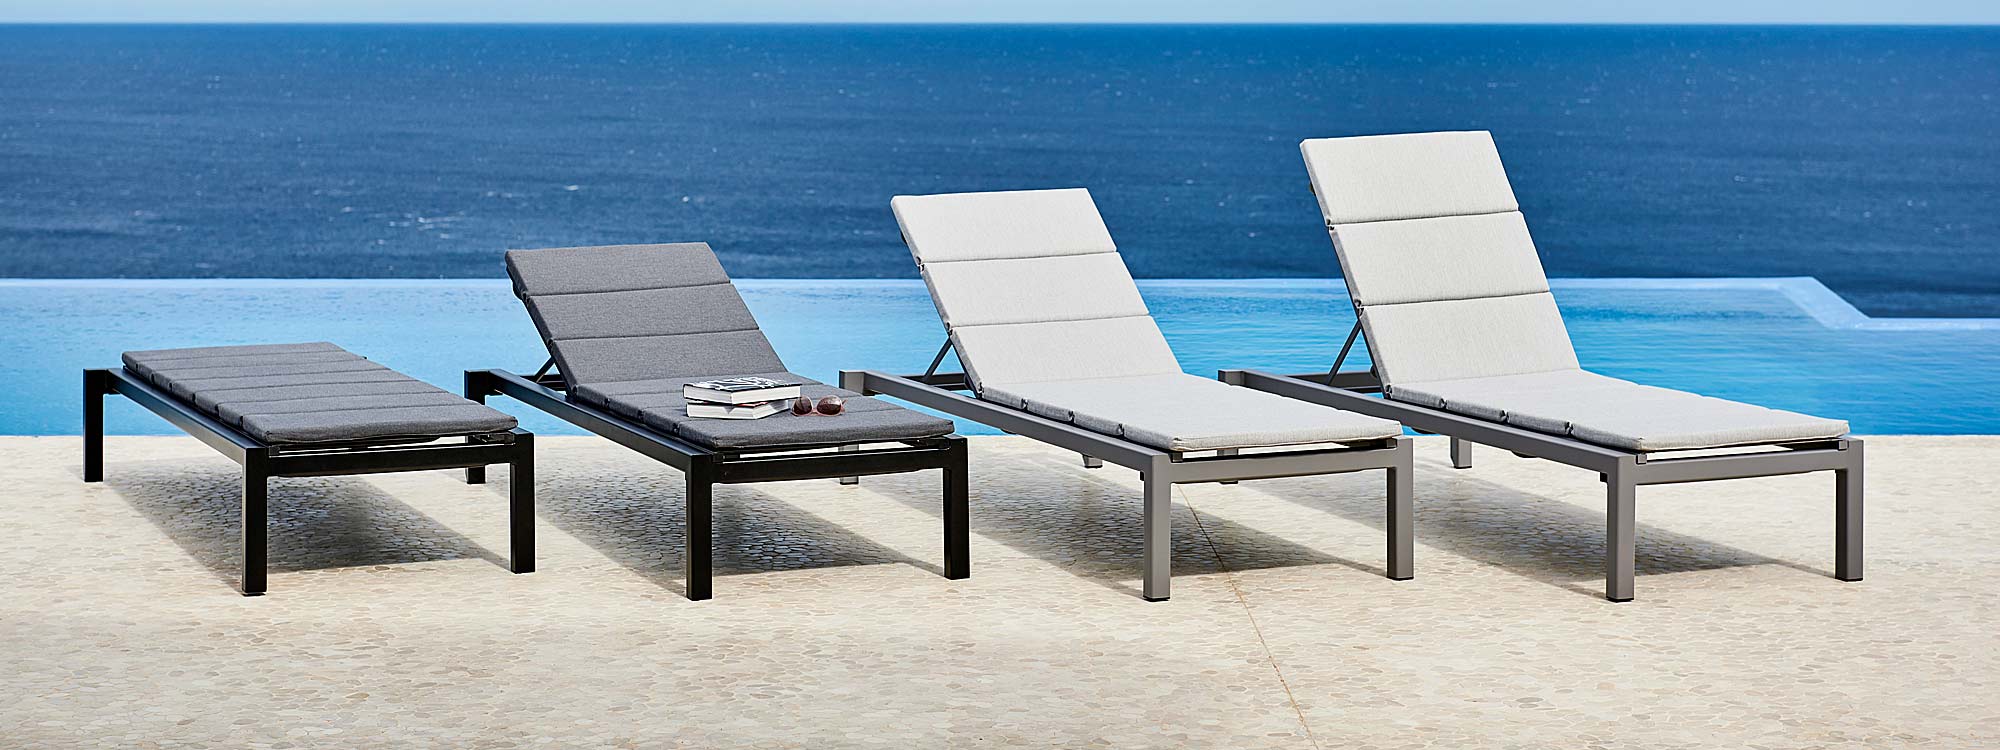 Image of 4 Relax minimalist sun loungers with head rests in different postures by Cane-line